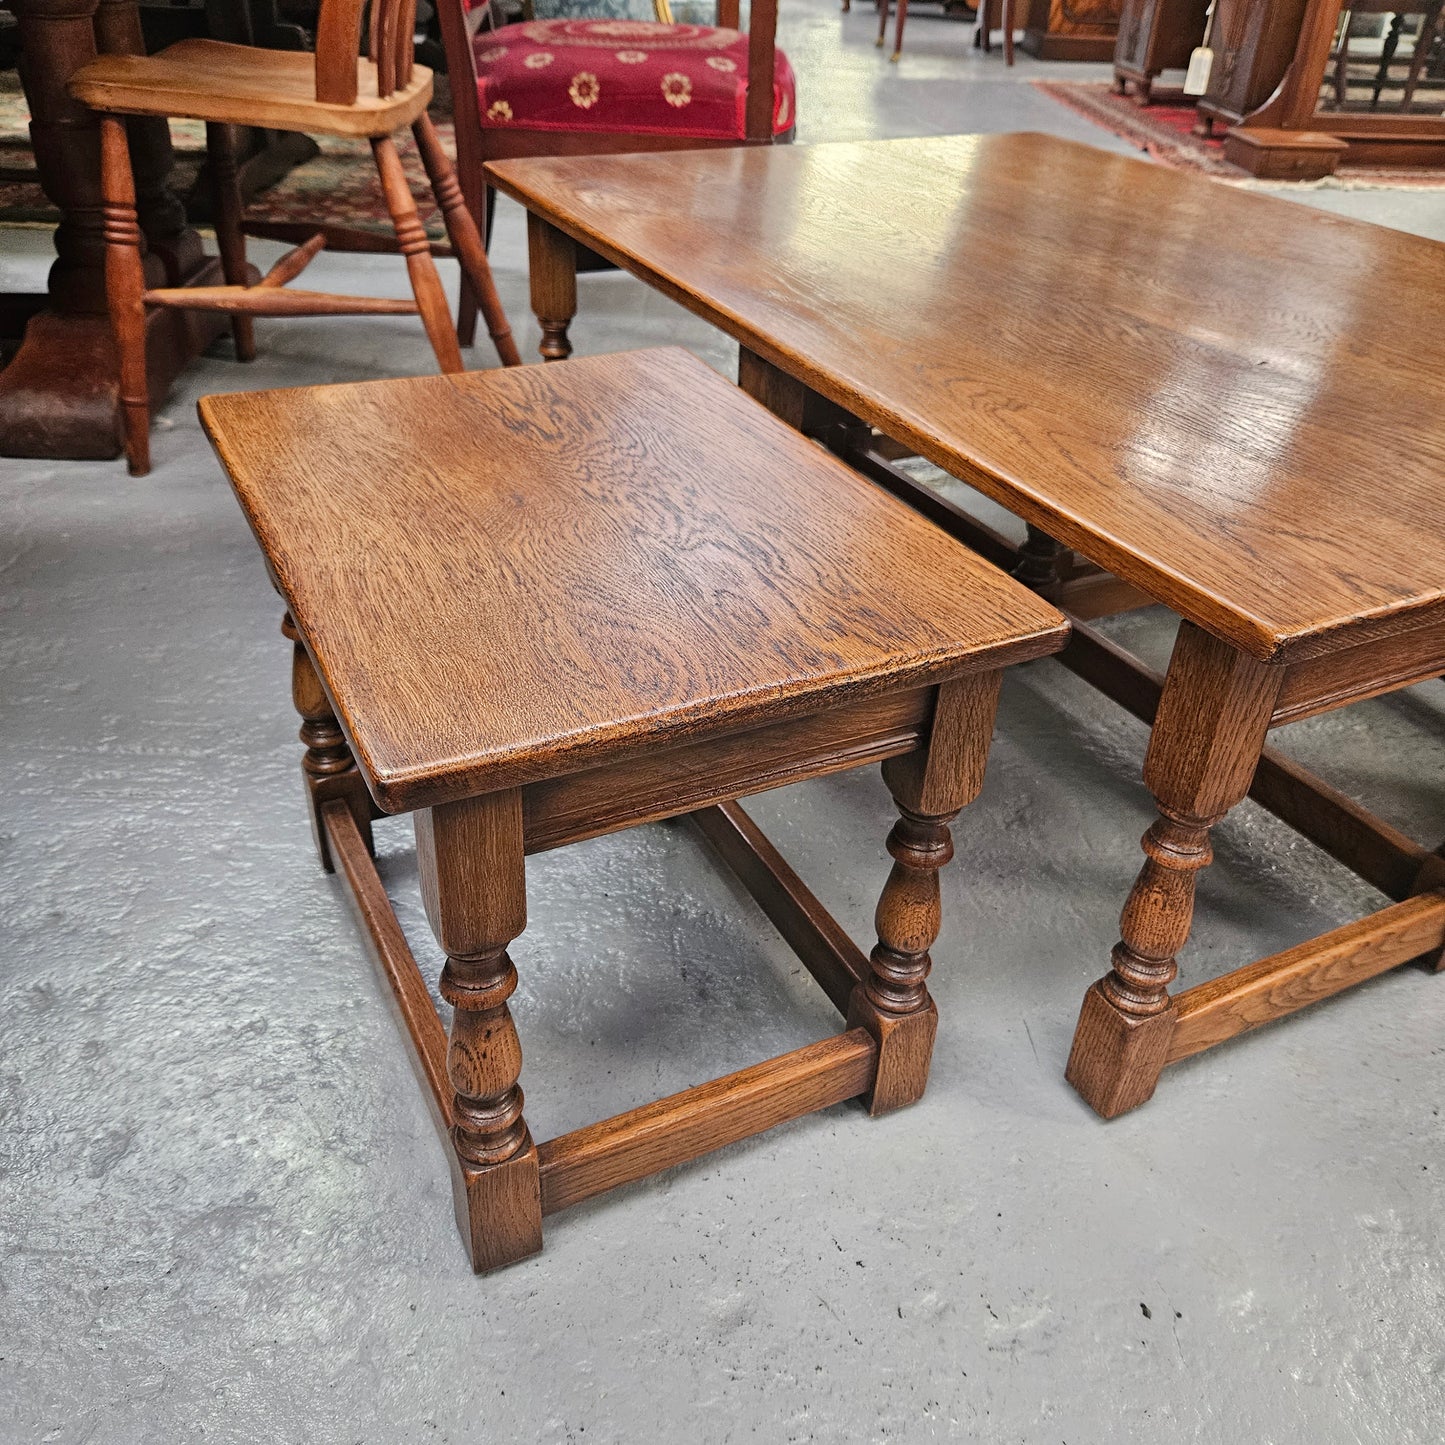 Large Period Style French Oak Coffee Table With Two Pull Out Side Tables